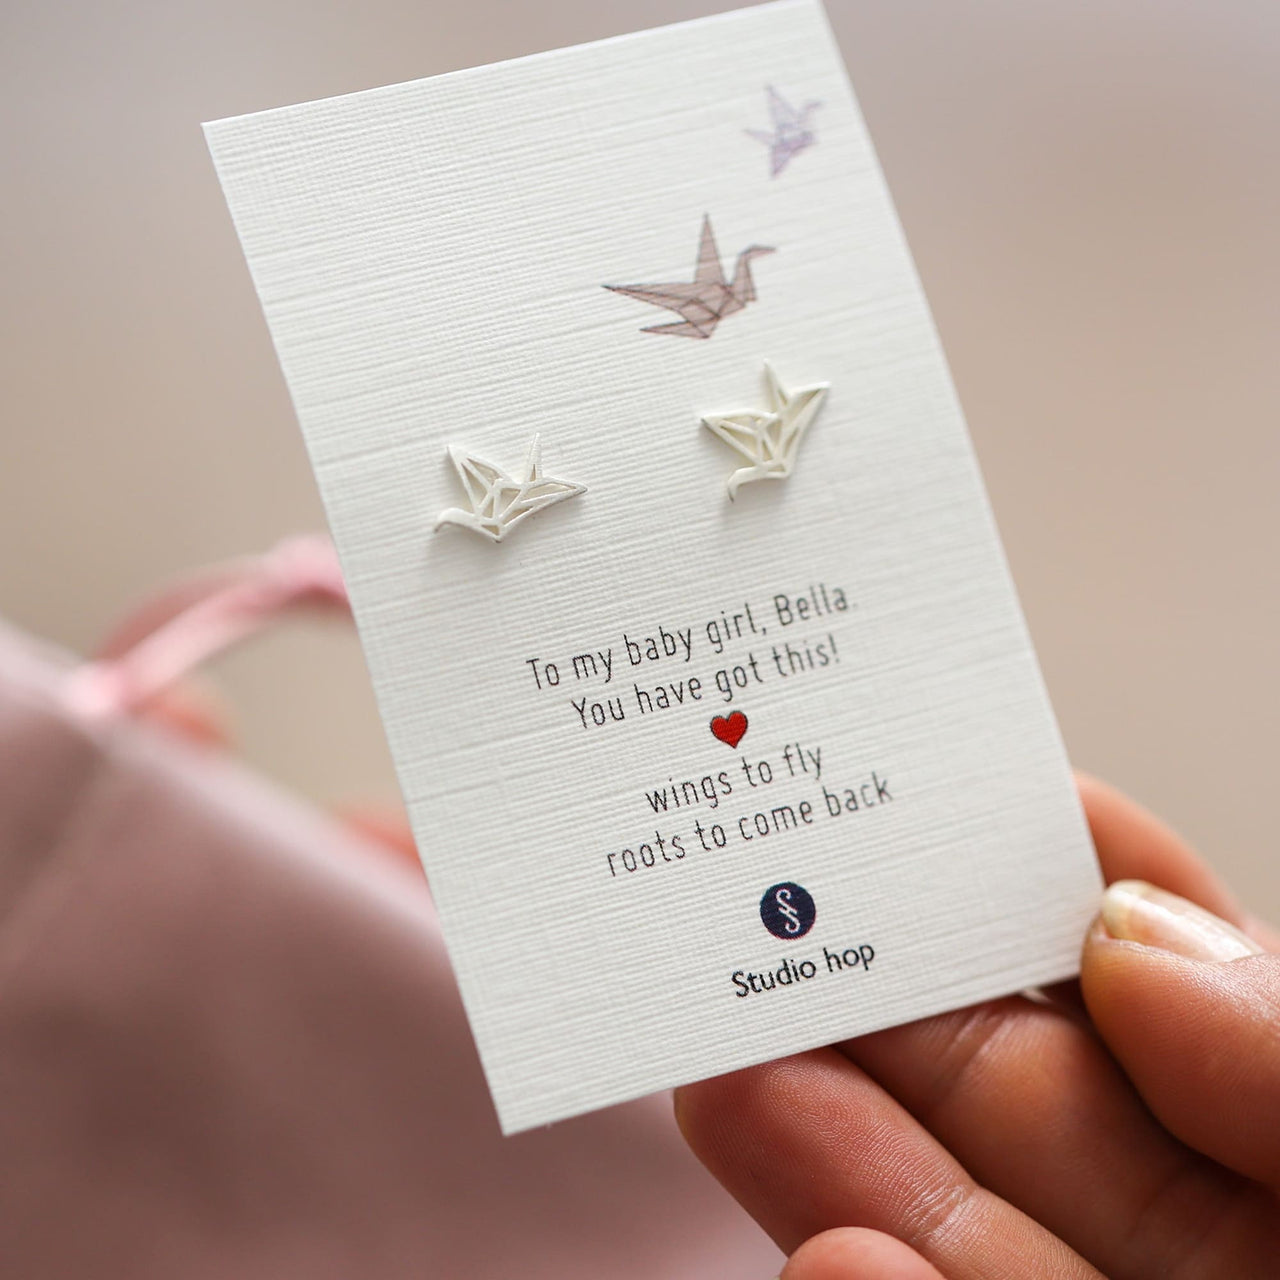 Sterling Silver Origami Crane Earrings In A Gift Box